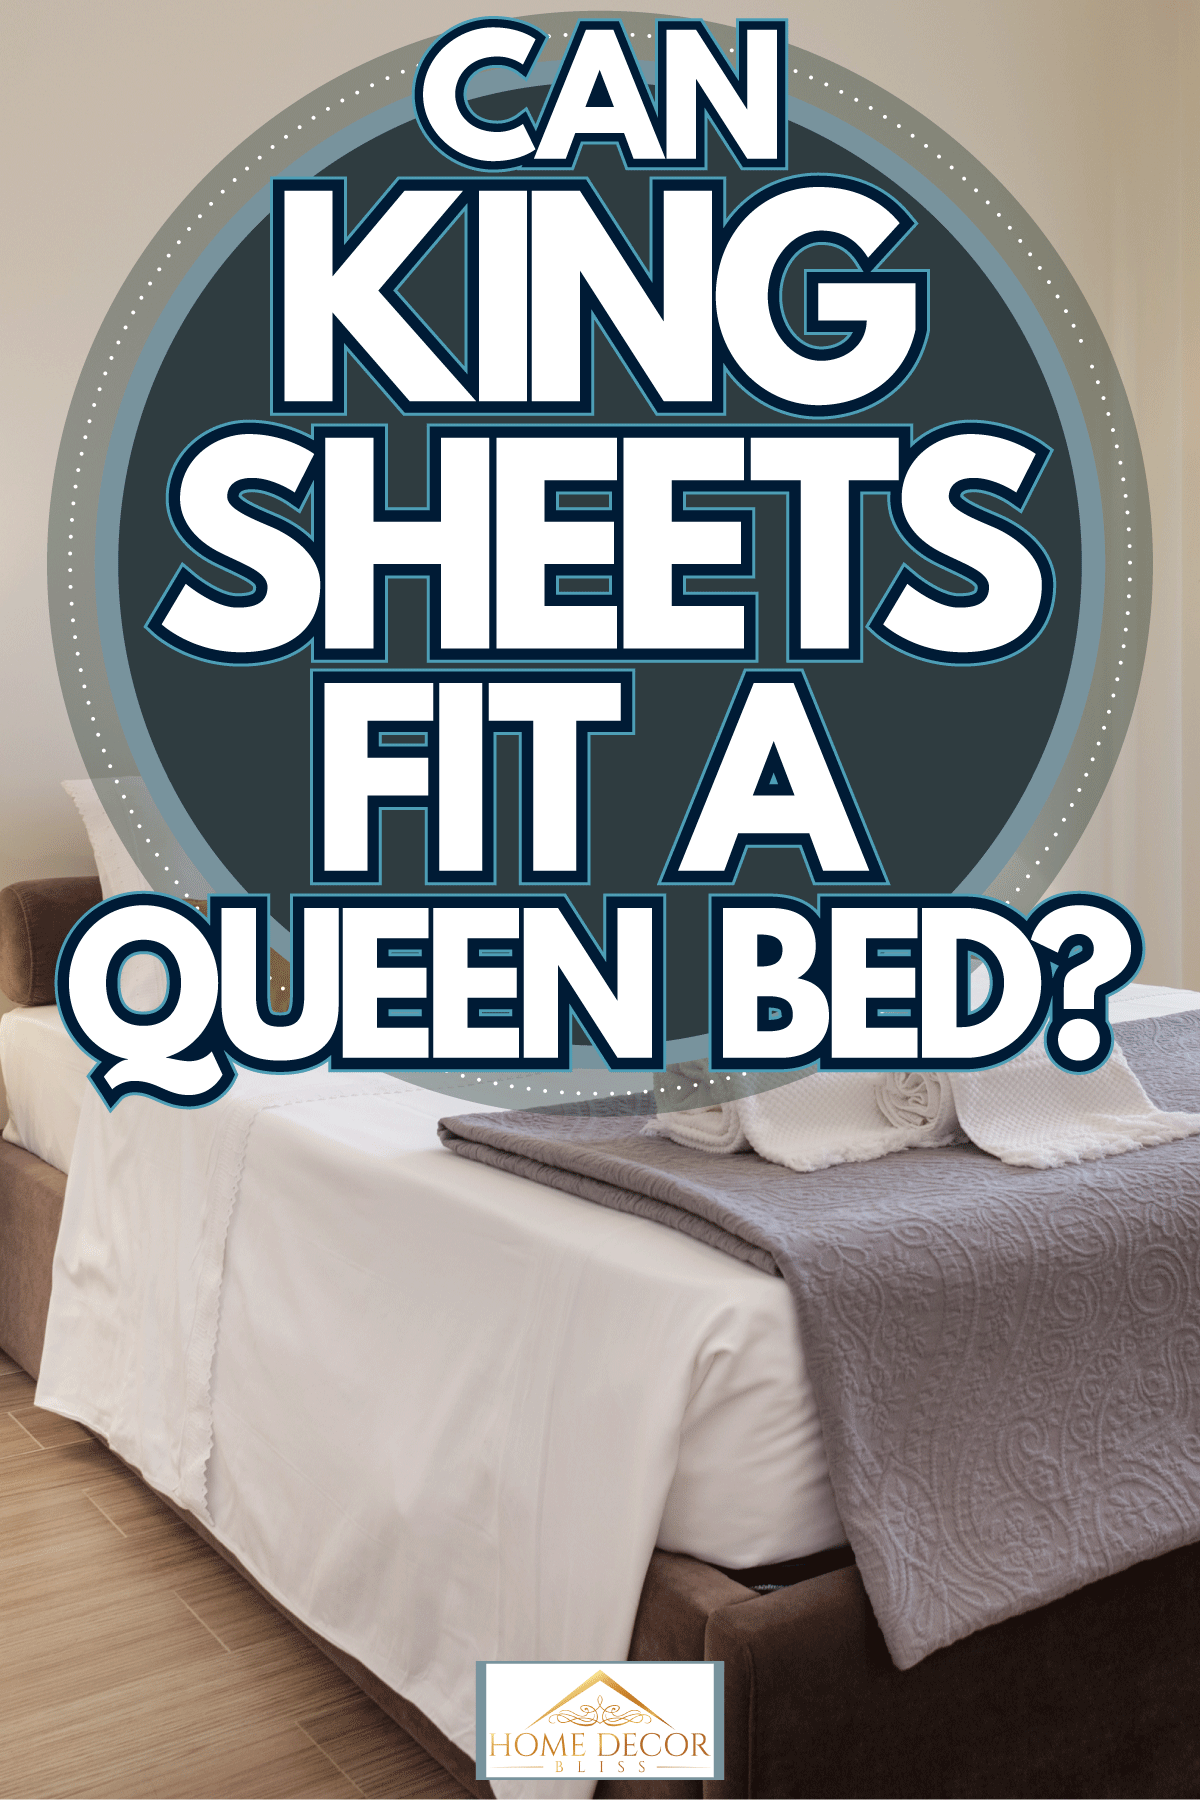 A modern bedroom with laminated flooring, white walls and a queen sized bed with white and gray beddings, Can King Sheets Fit A Queen Bed?